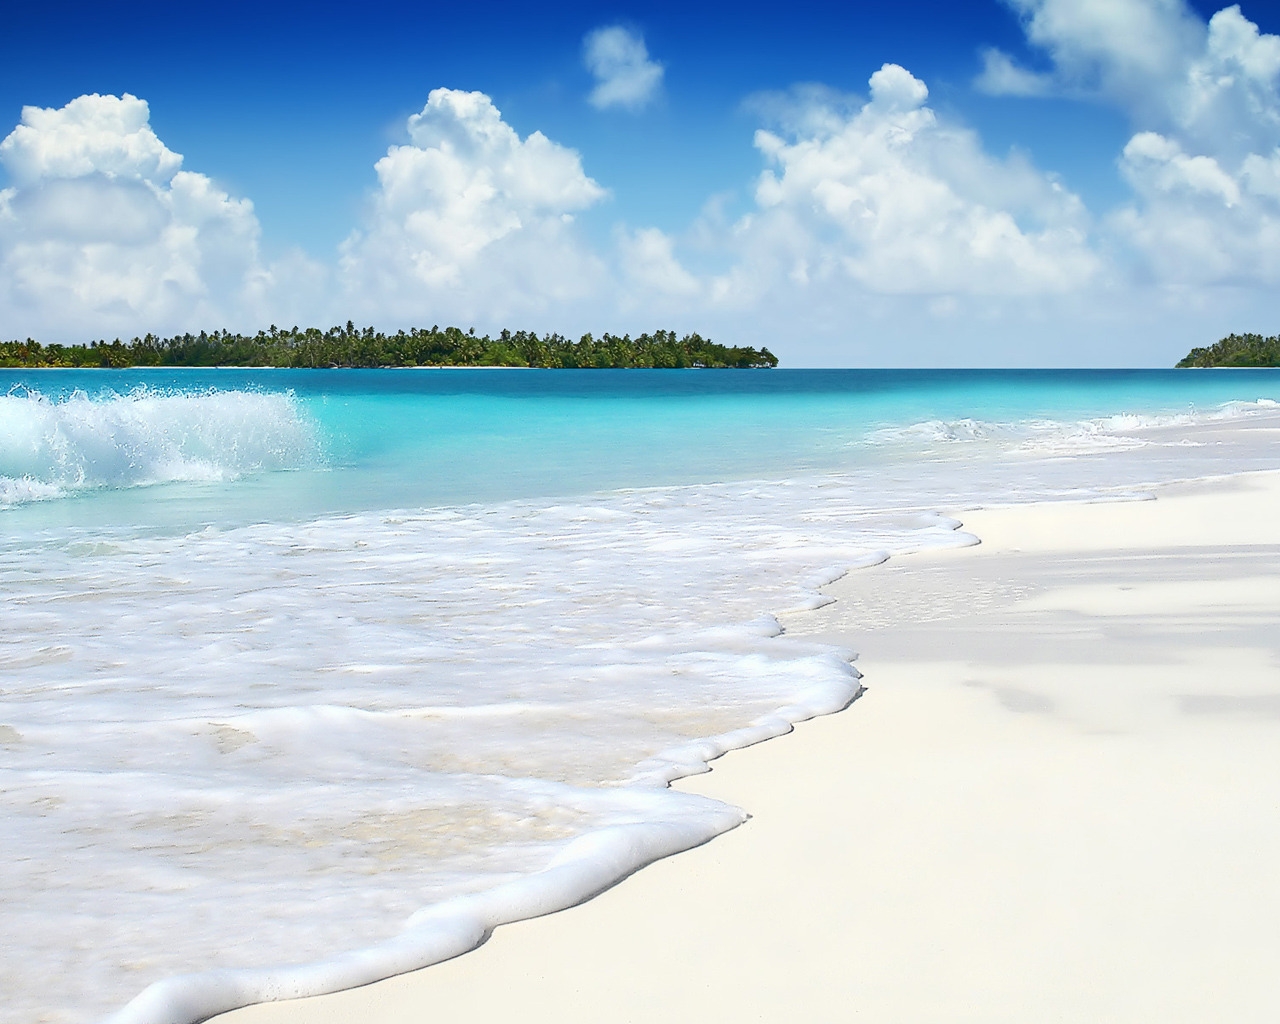 The Beautiful Summer Island for 1280 x 1024 resolution